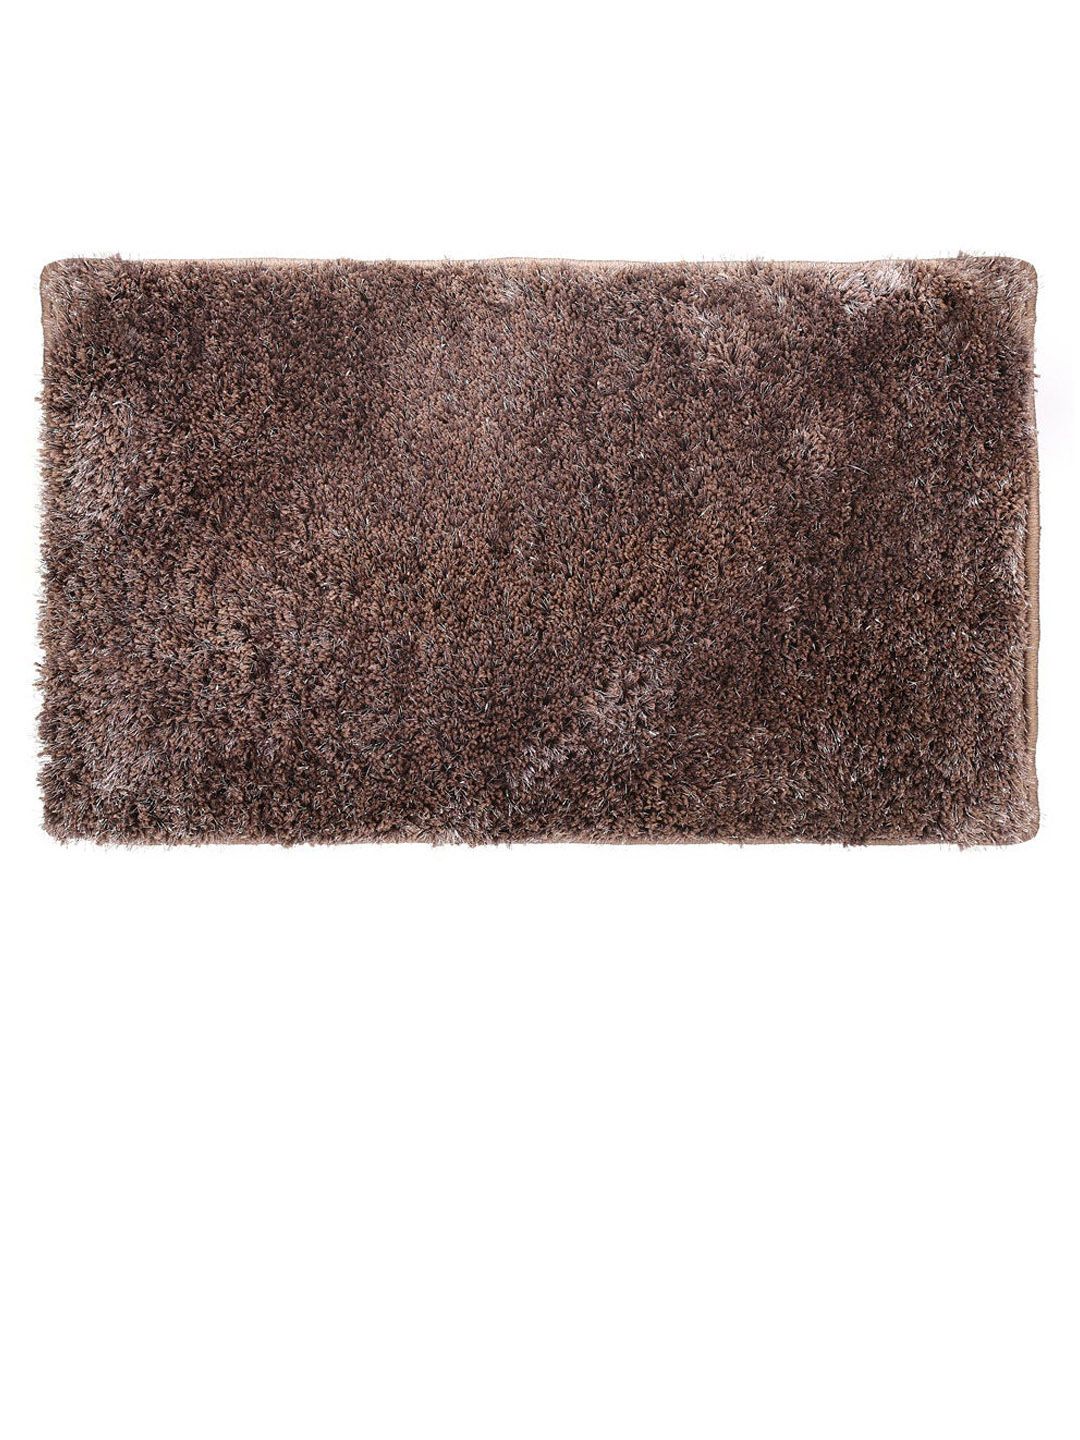 Athome by Nilkamal Brown Lurex Shaggy Floor Rug Price in India